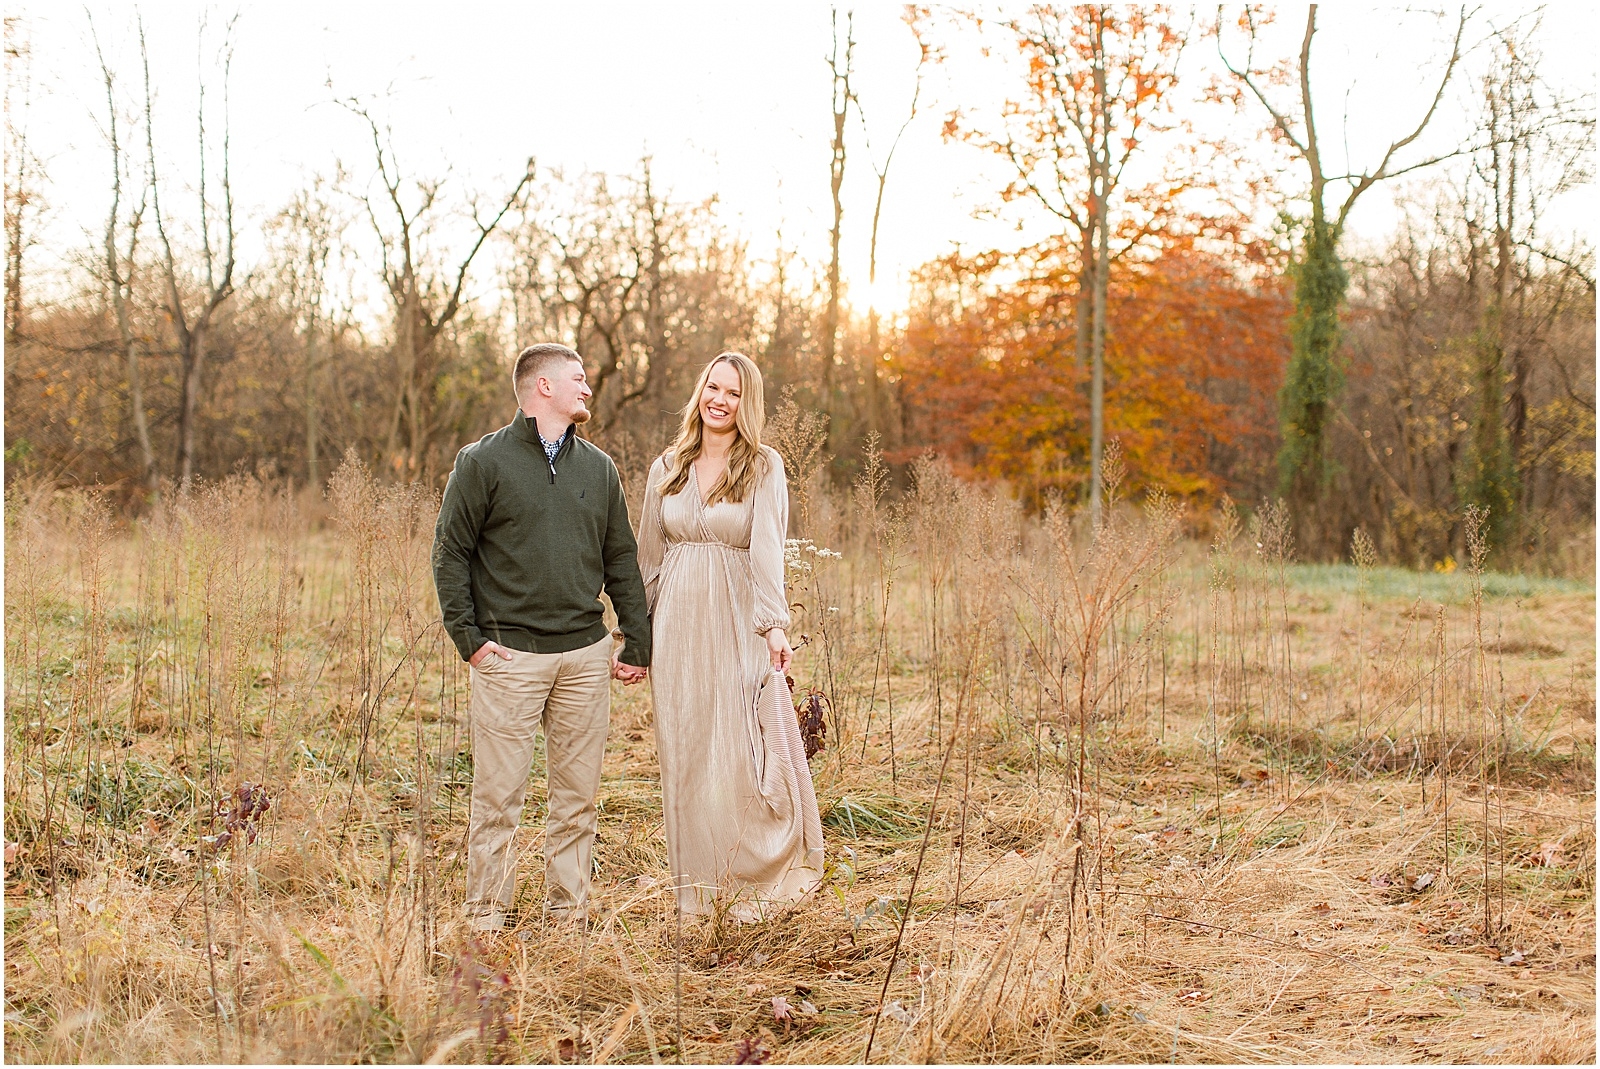 A Fall Southern Indiana Engagement Seesion | Cody and Hannah | Bret and Brandie Photography 039.jpg